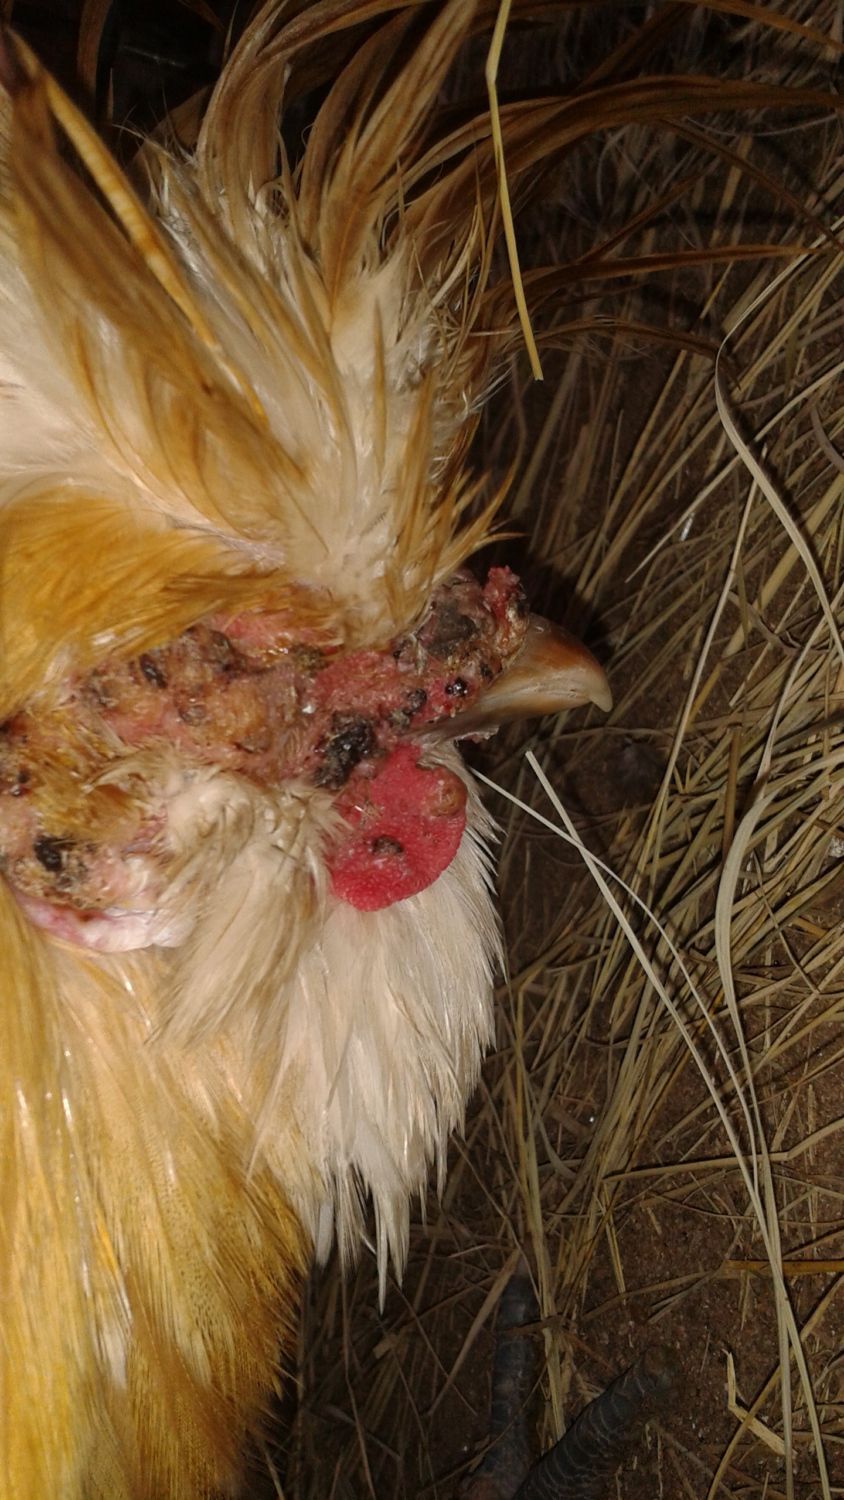 Rabbit Eye Issue - What's going on here?  BackYard Chickens - Learn How to  Raise Chickens